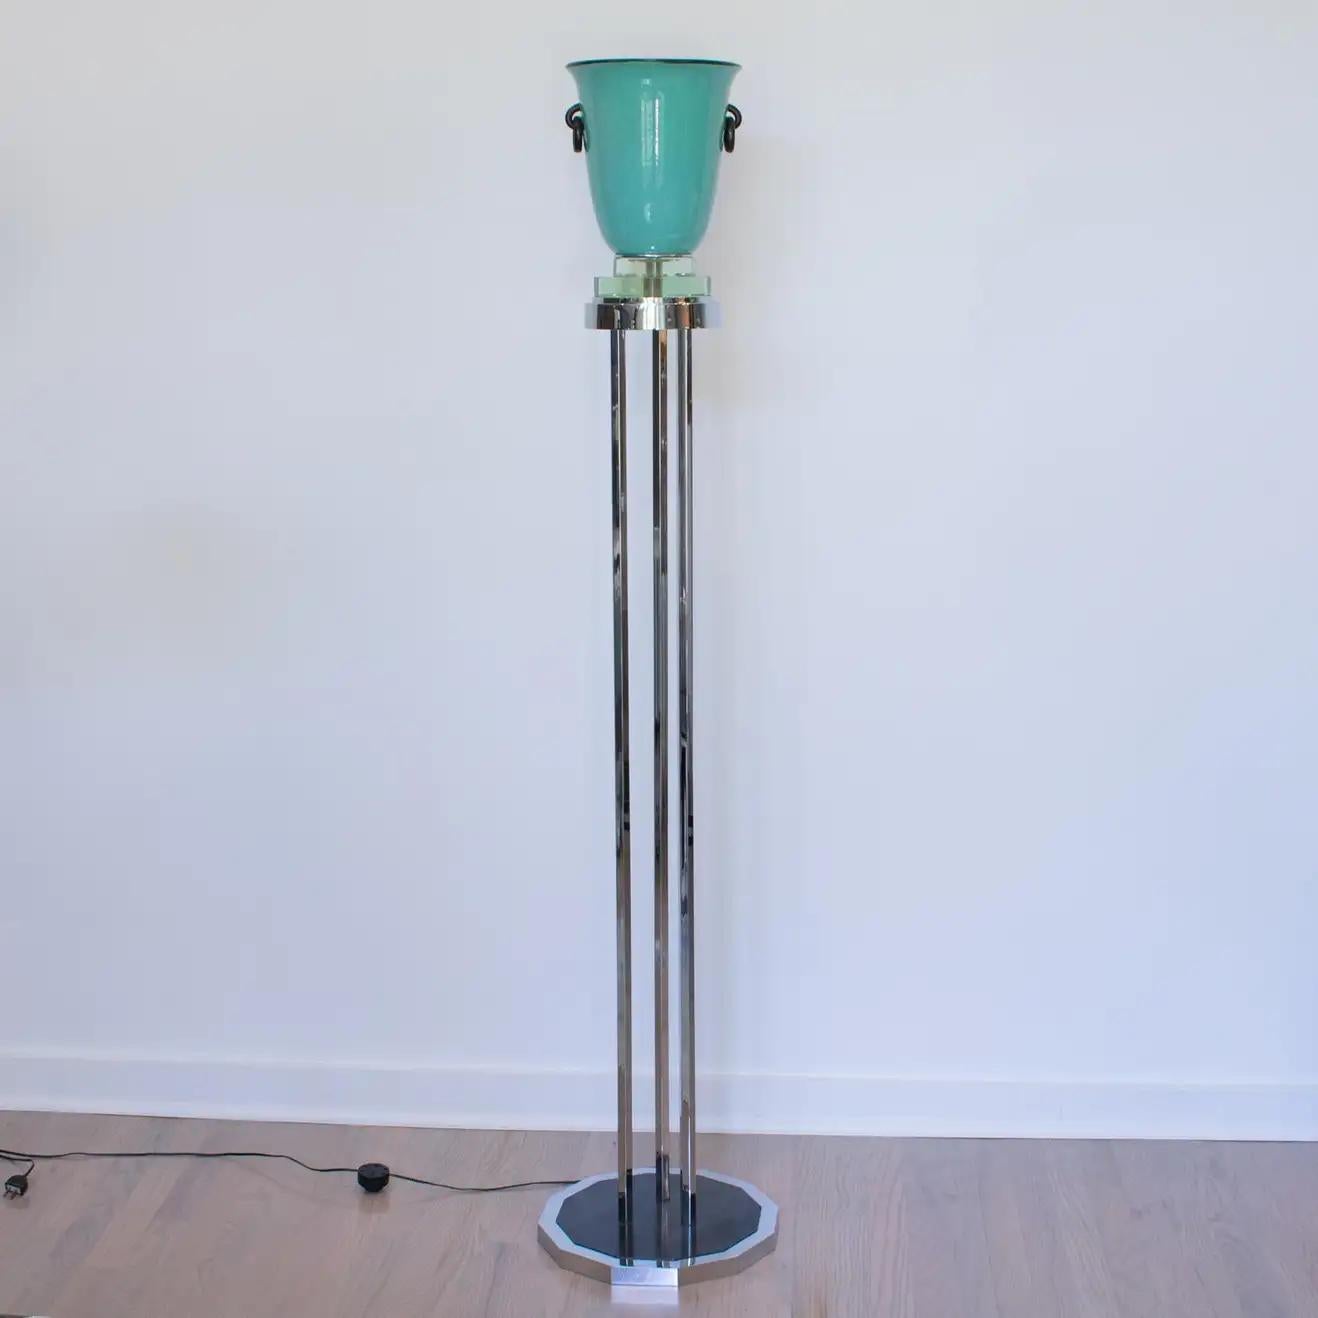 This beautiful and rare original French Art Deco chrome and ceramic uplight floor lamp or torchère (torchiere) was designed by Henri Chaumeil (1877-1944). It features a tall chromed metal base with three hexagonal poles and a faceted base in shiny